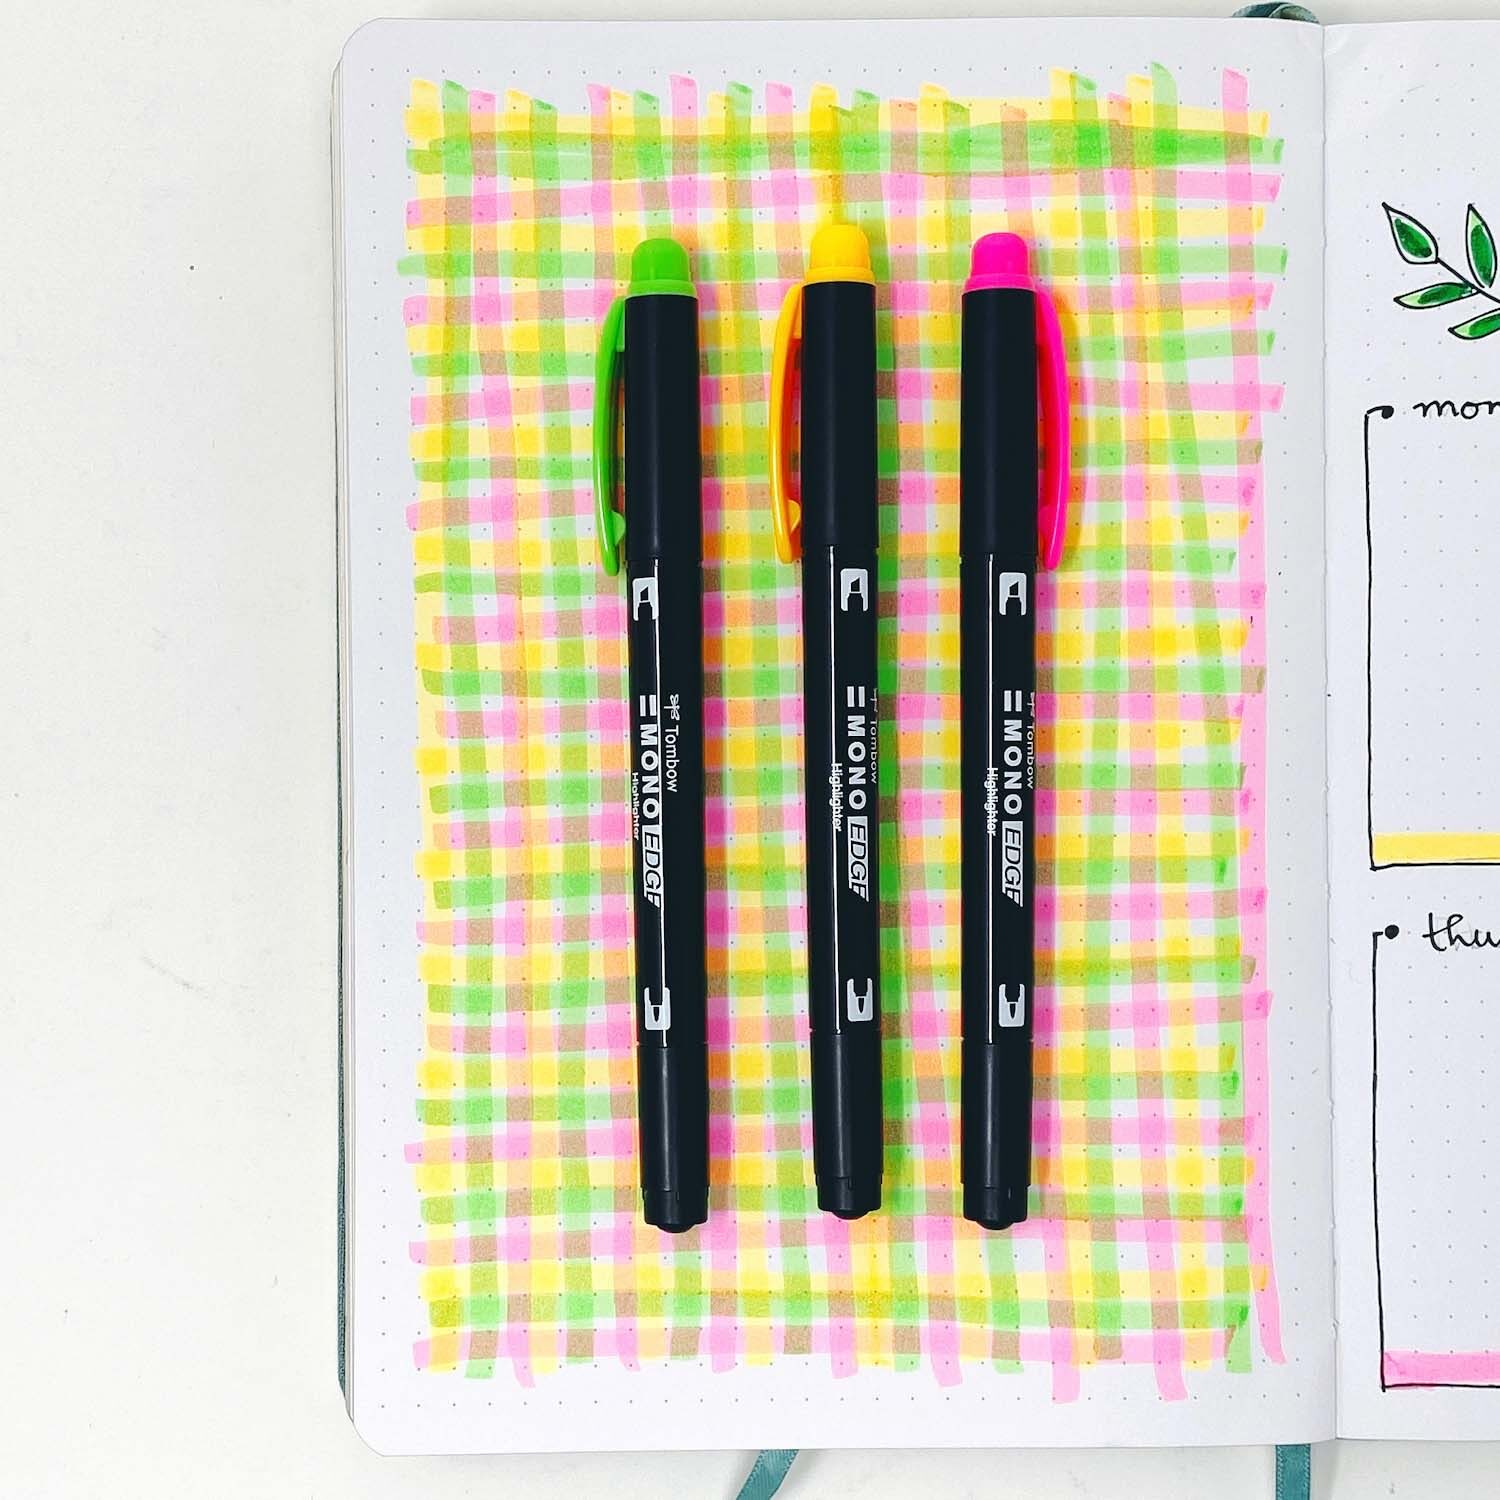 10 Fun Things to Add in Your Travel Album - Tombow USA Blog